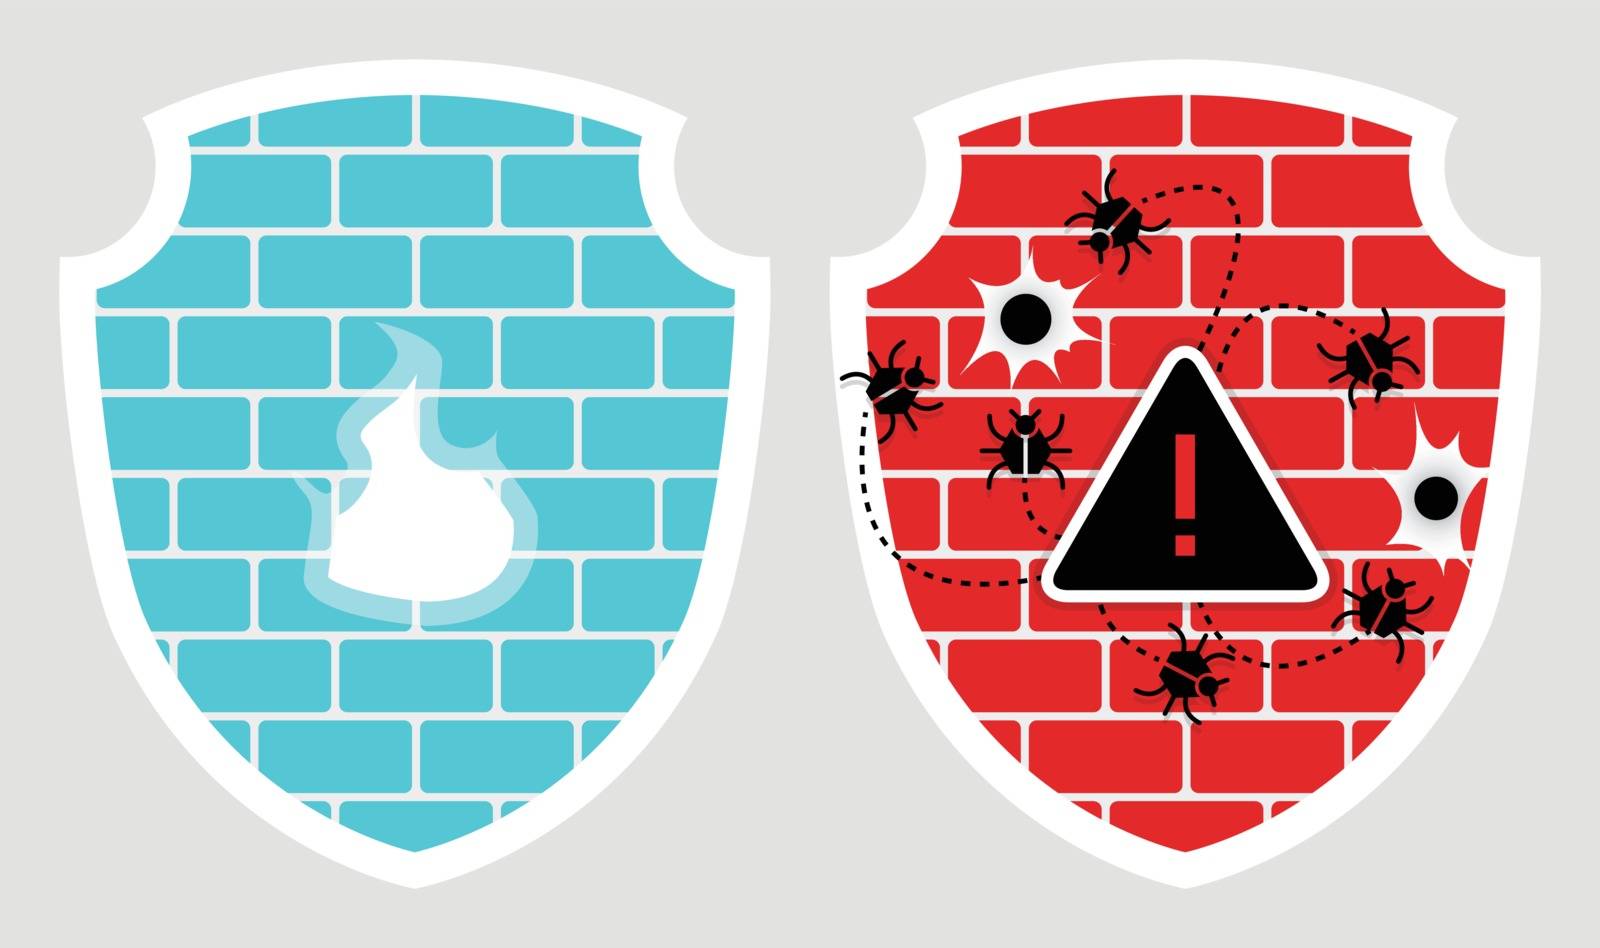 Set of 2 shields with cyber security brick wall icons with fire, bullet holes and bugs isolated on gray background. Data protection and cracked firewall symbols. Network security concept. Vector illustration